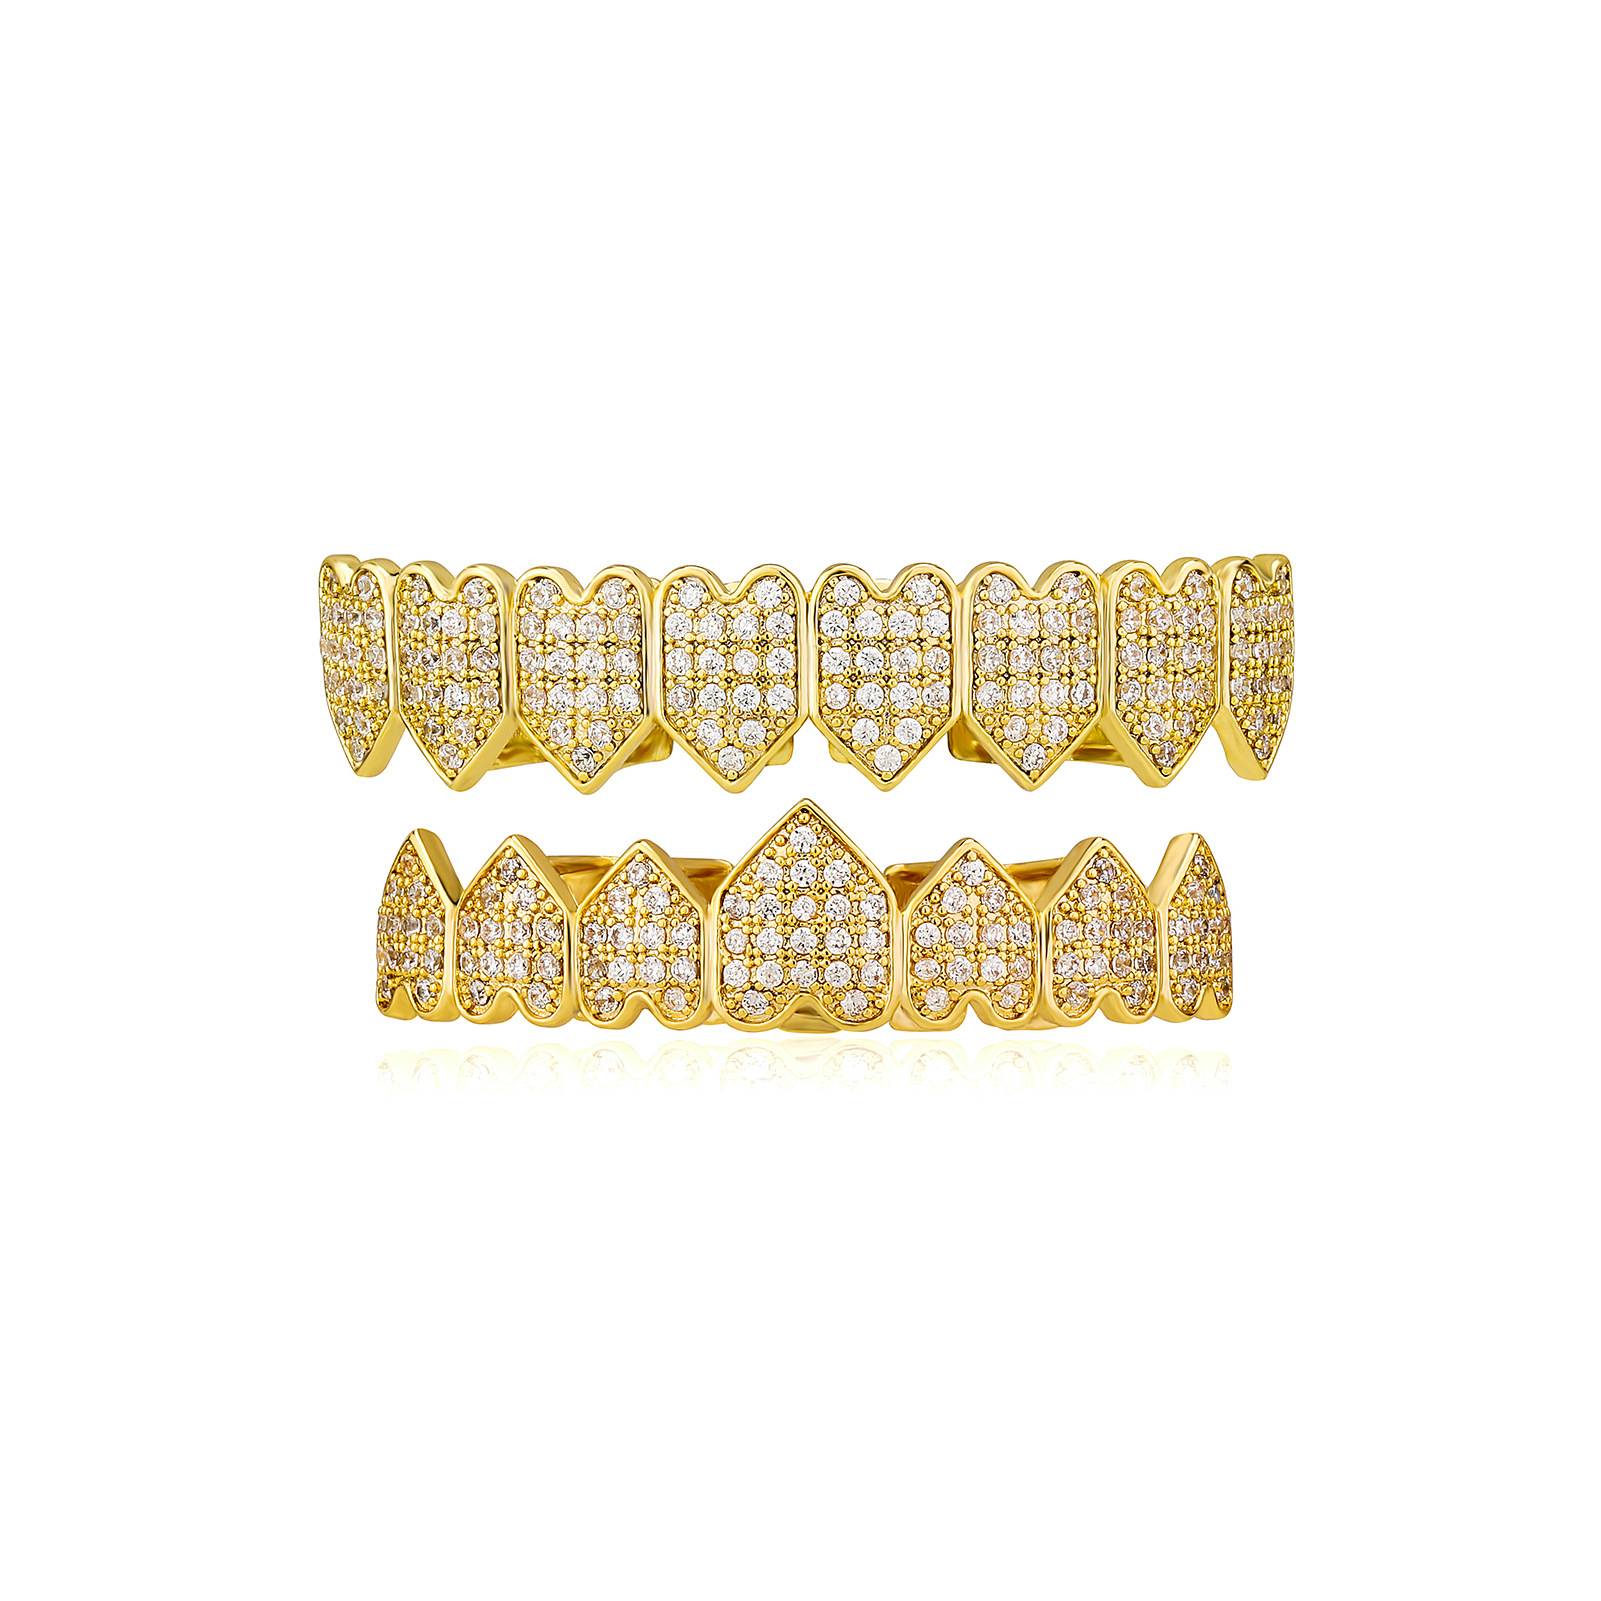 Iced Out Hip Hop Grills Teeth Grillz Set For Unisex Top Bottom Mouth Heart Teeth Grills Shiny Full CZ Fashion Jewelry For Gifts